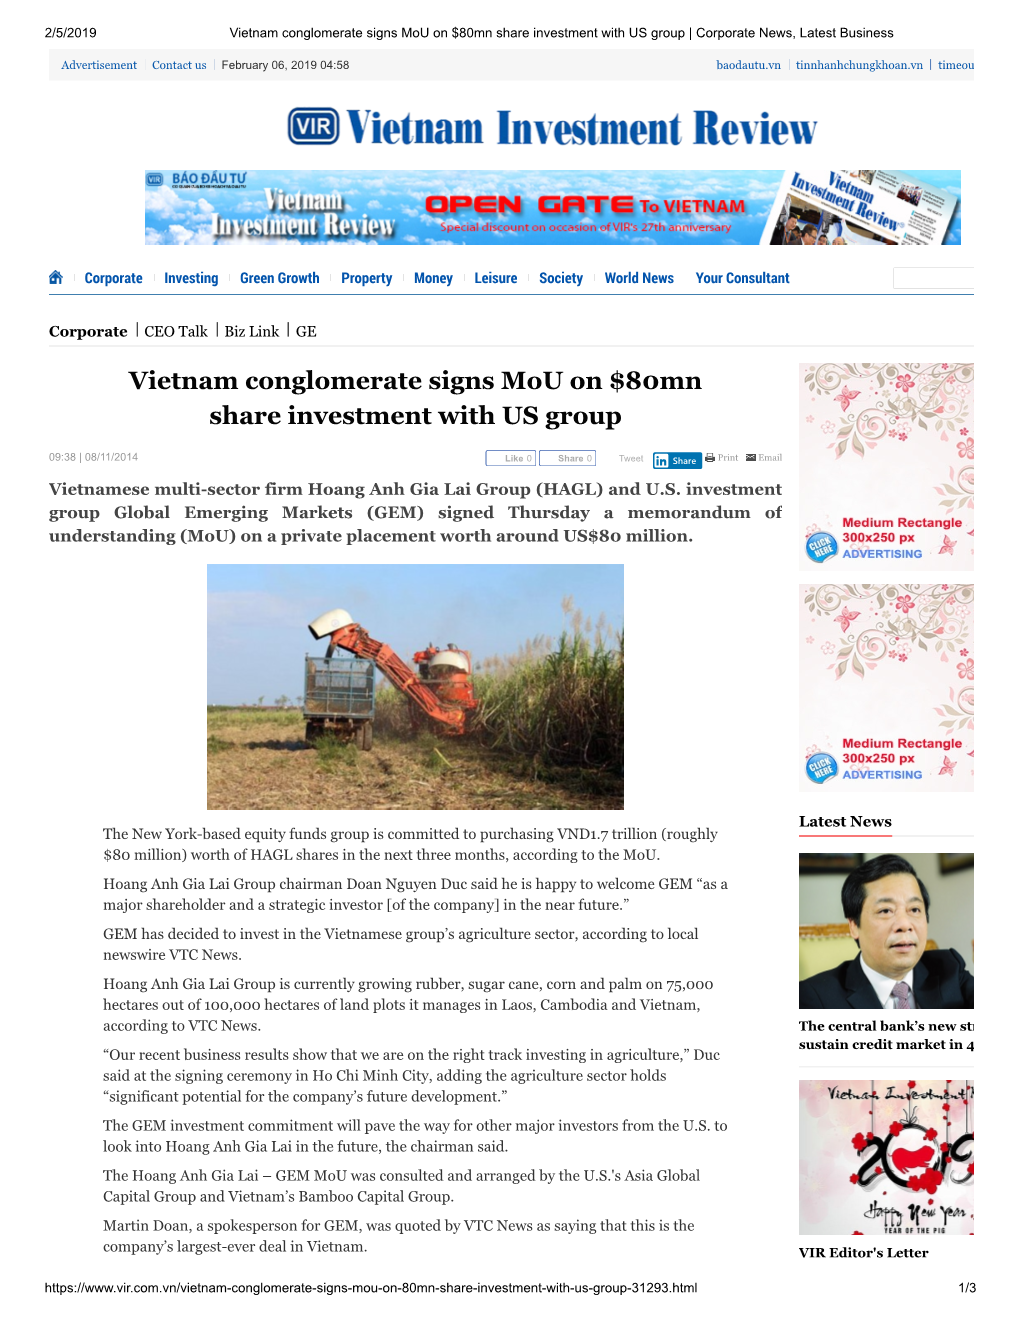 Vietnam Conglomerate Signs Mou on $80Mn Share Investment with US Group | Corporate News, Latest Business